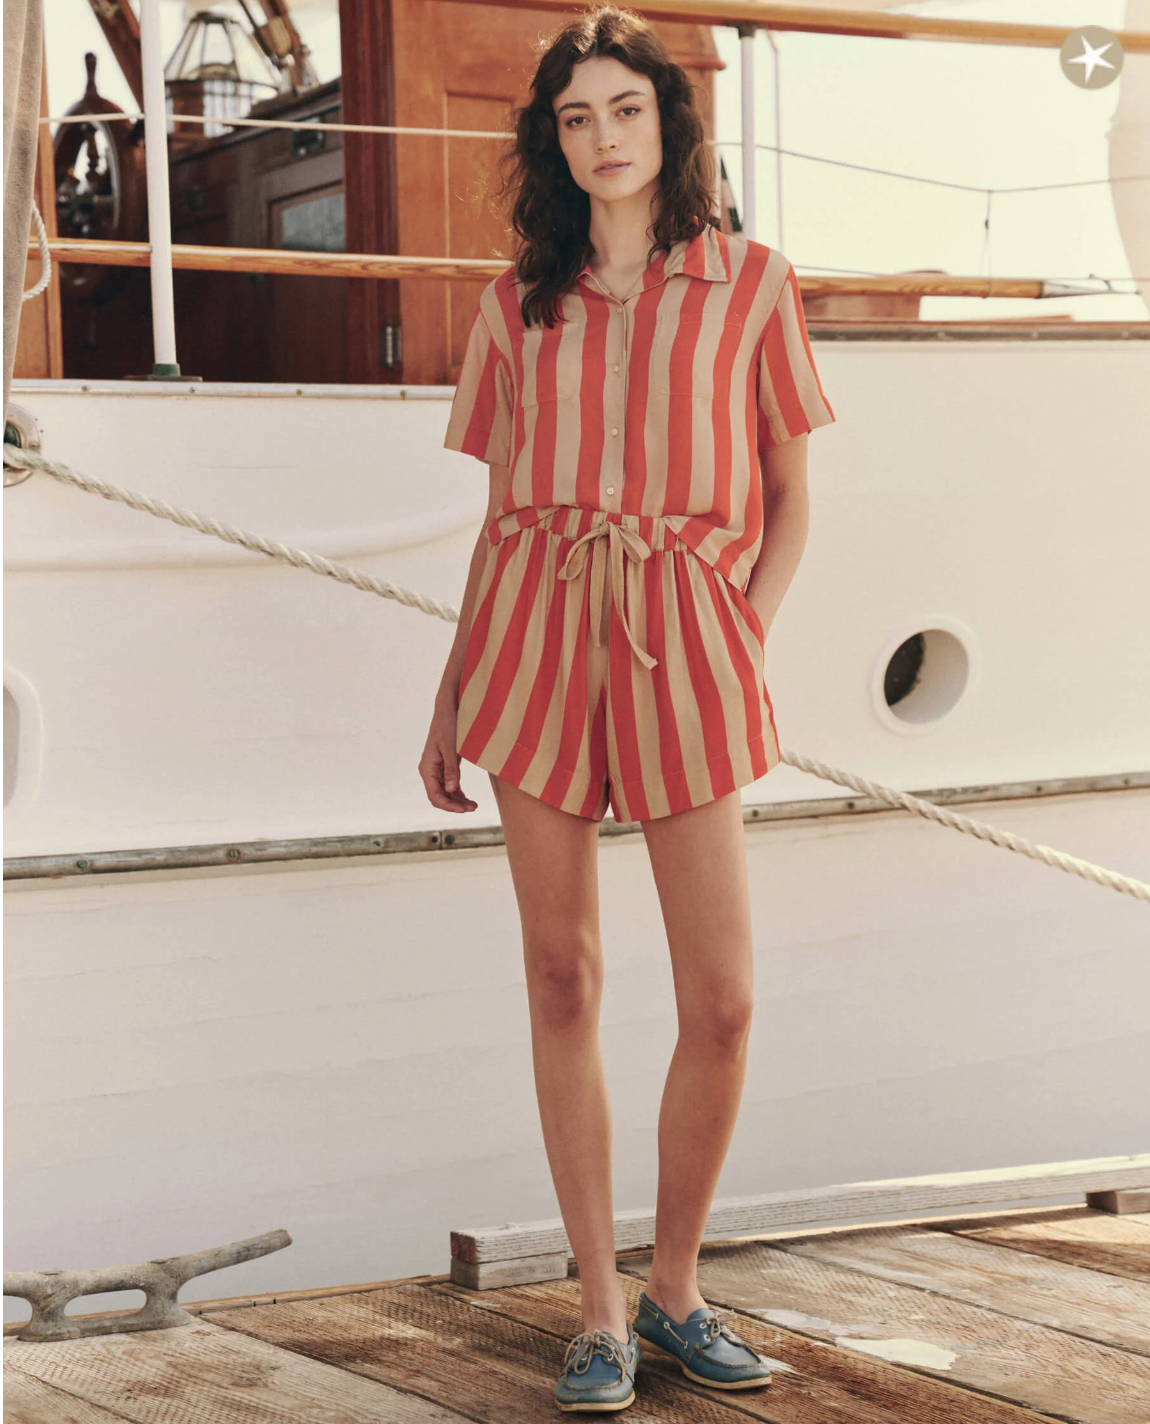 Person with long wavy hair stands on a dock in front of a boat. They wear a matching set with bold, red and beige vertical stripes, consisting of The Bonfire Short from The Great Inc., a short-sleeve button-up shirt, and shorts tied at the adjustable waist. They also wear boat shoes.